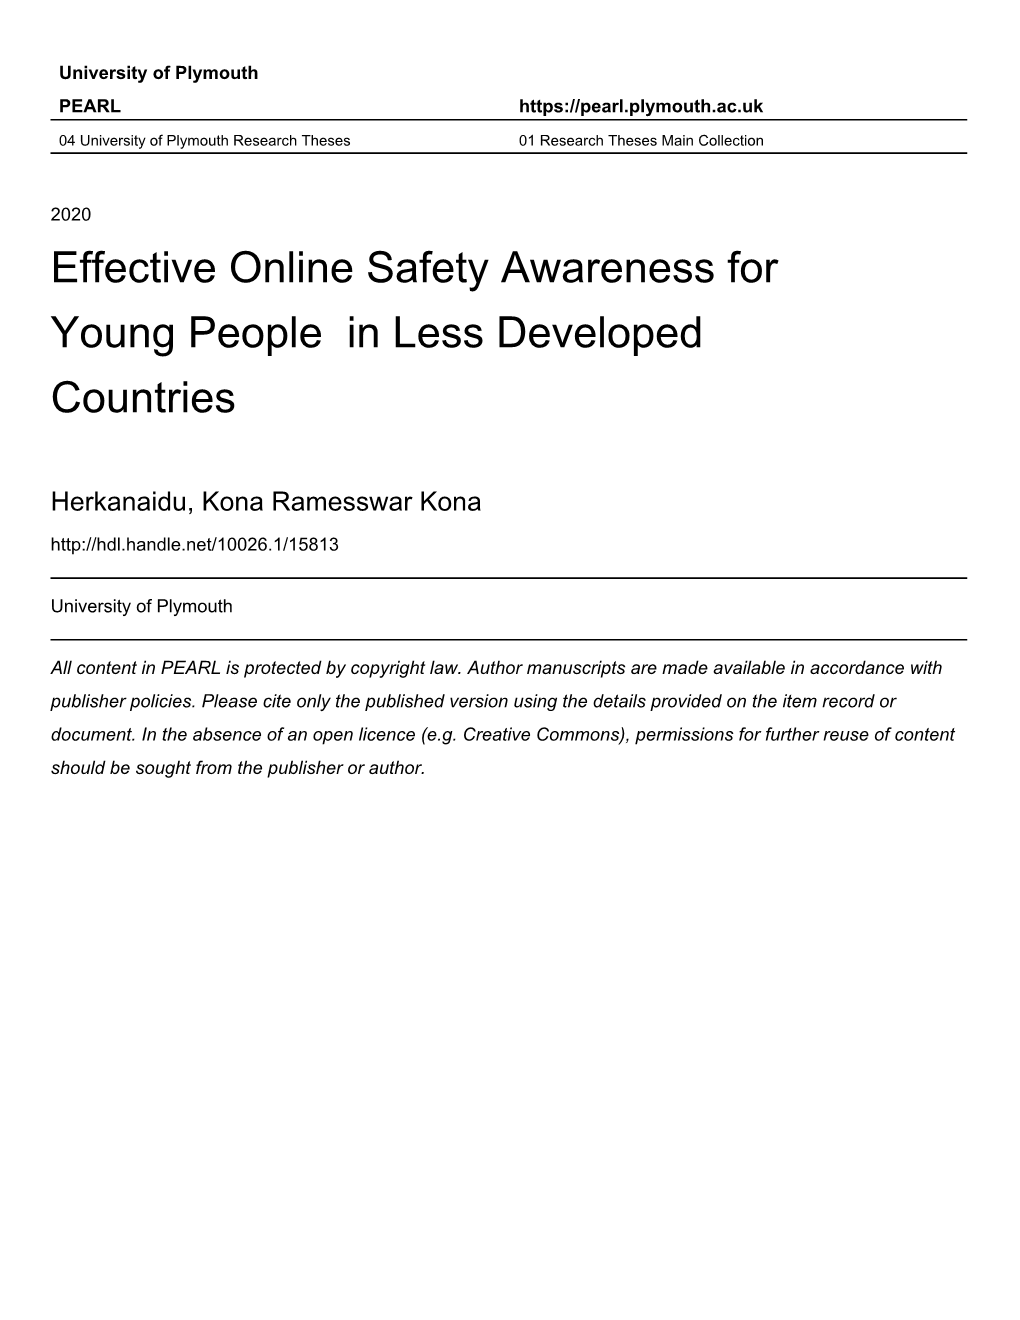 Effective Online Safety Awareness for Young People in Less Developed Countries